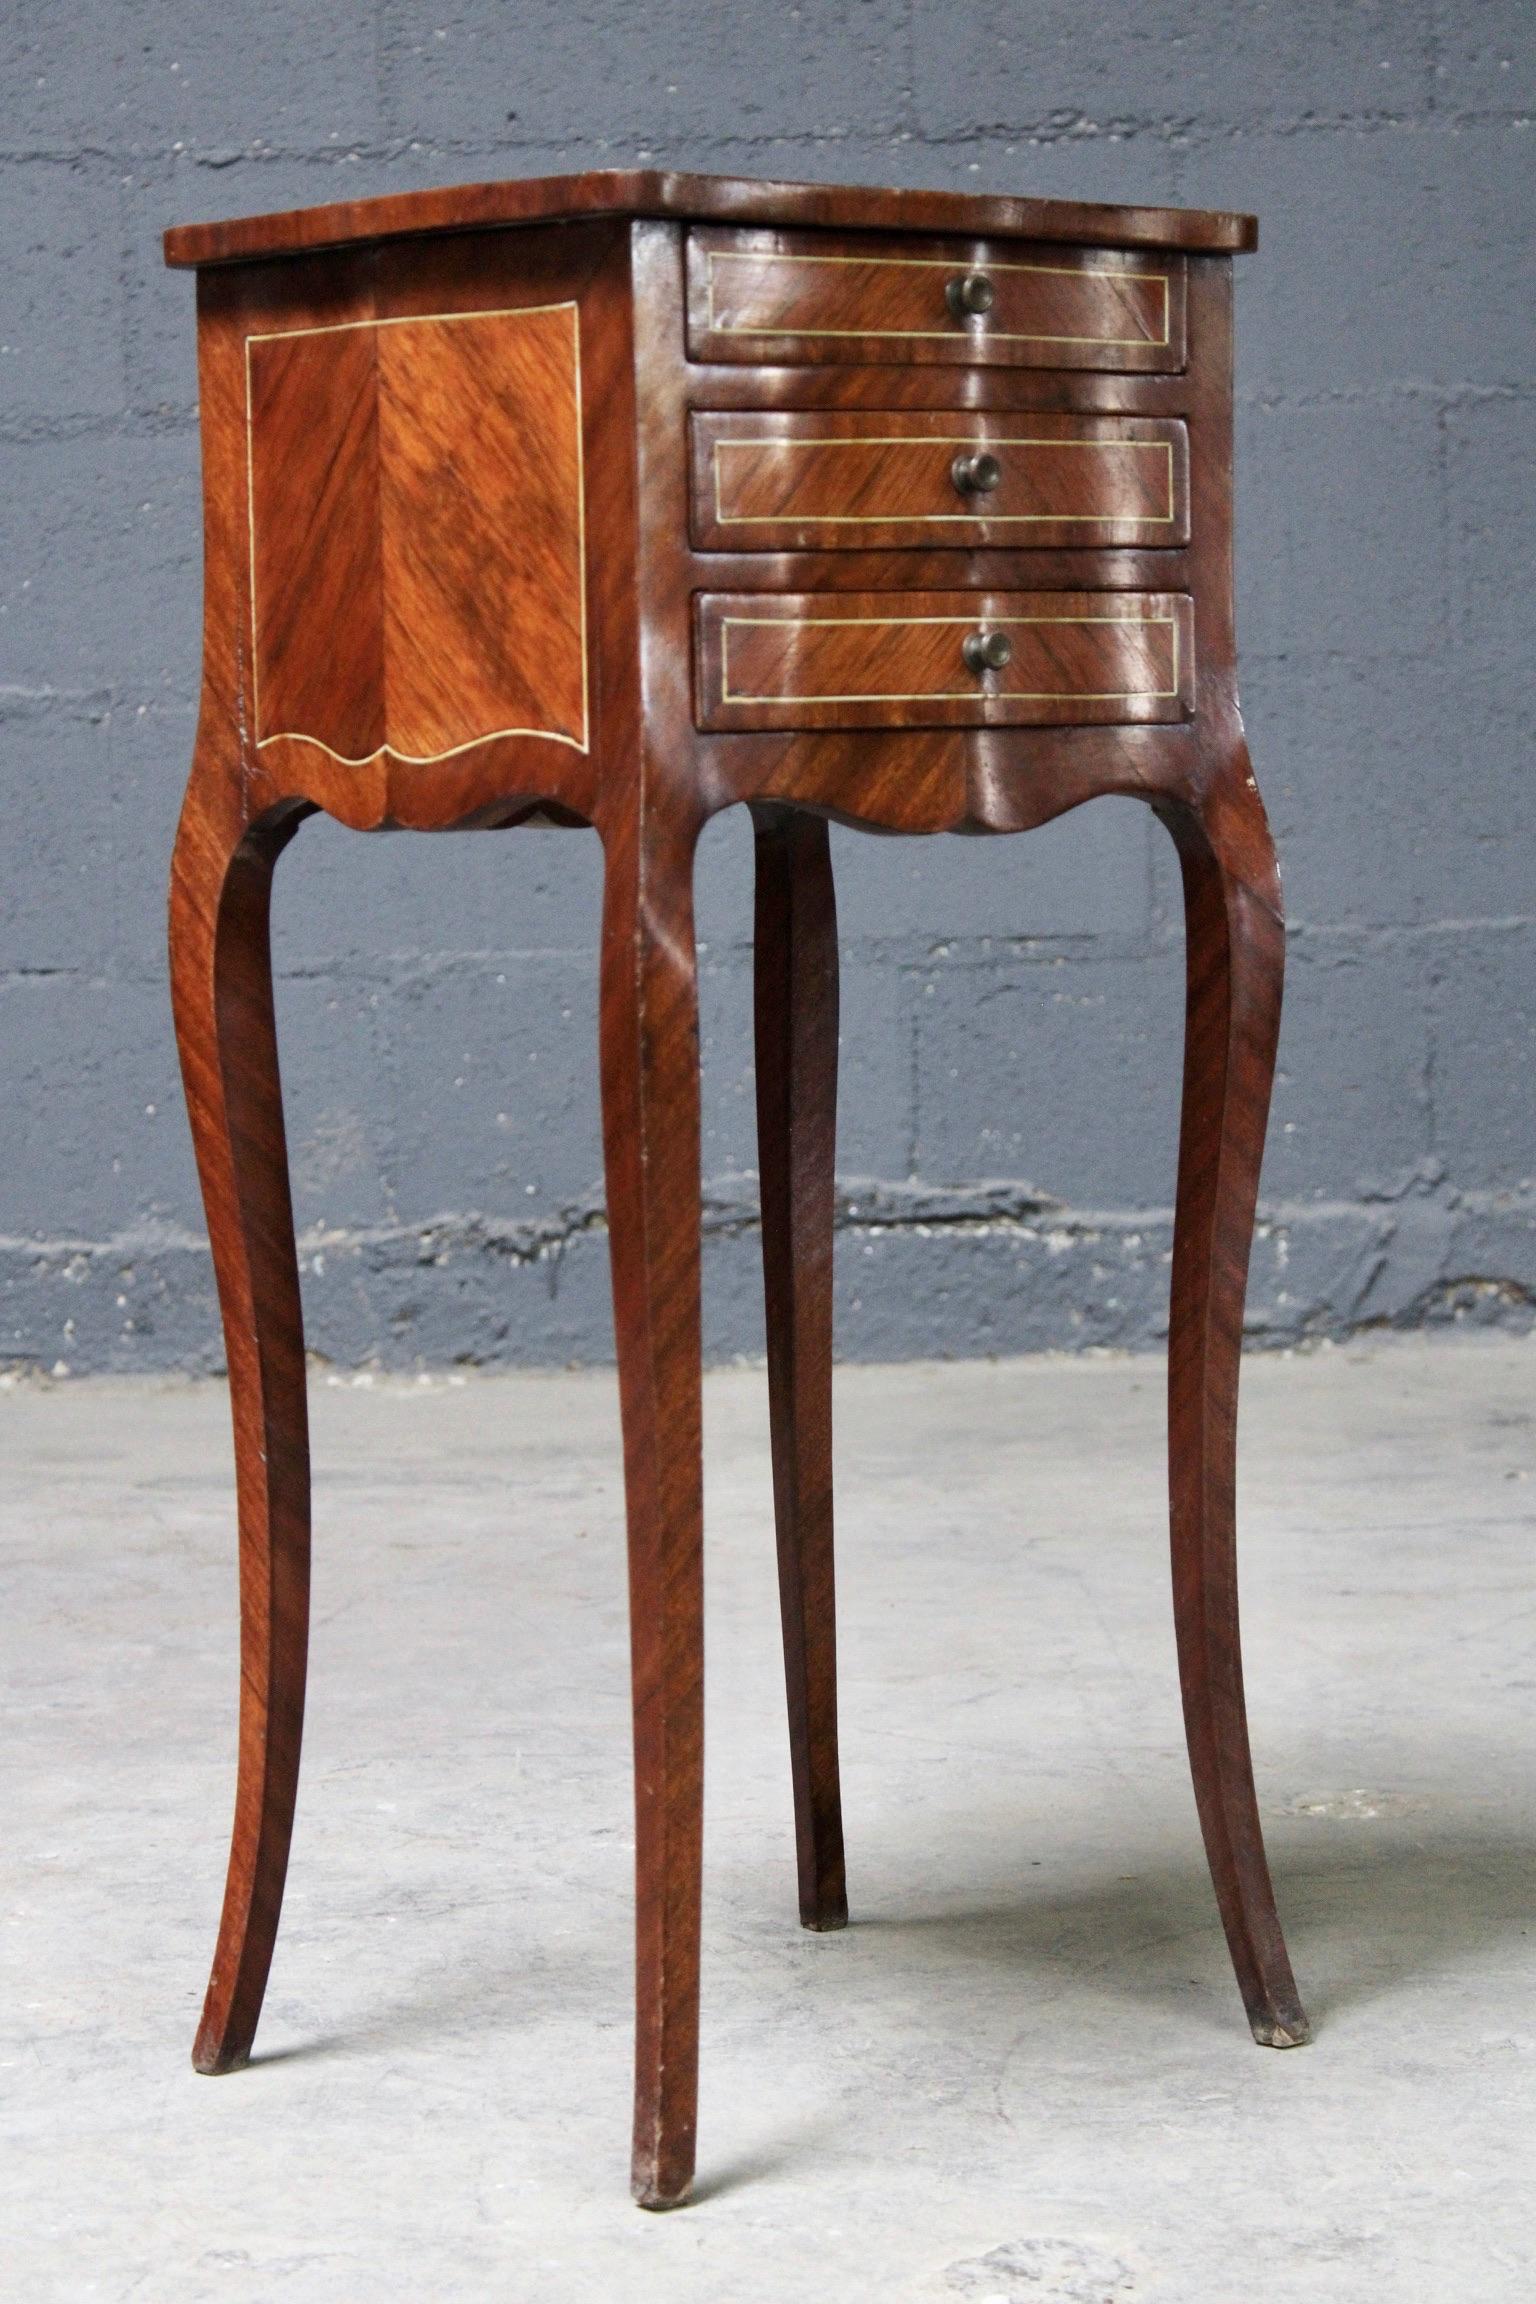 This side table has three drawers and Queen Anne legs. Inlayed mahogany creates a patterned tabletop and sides.